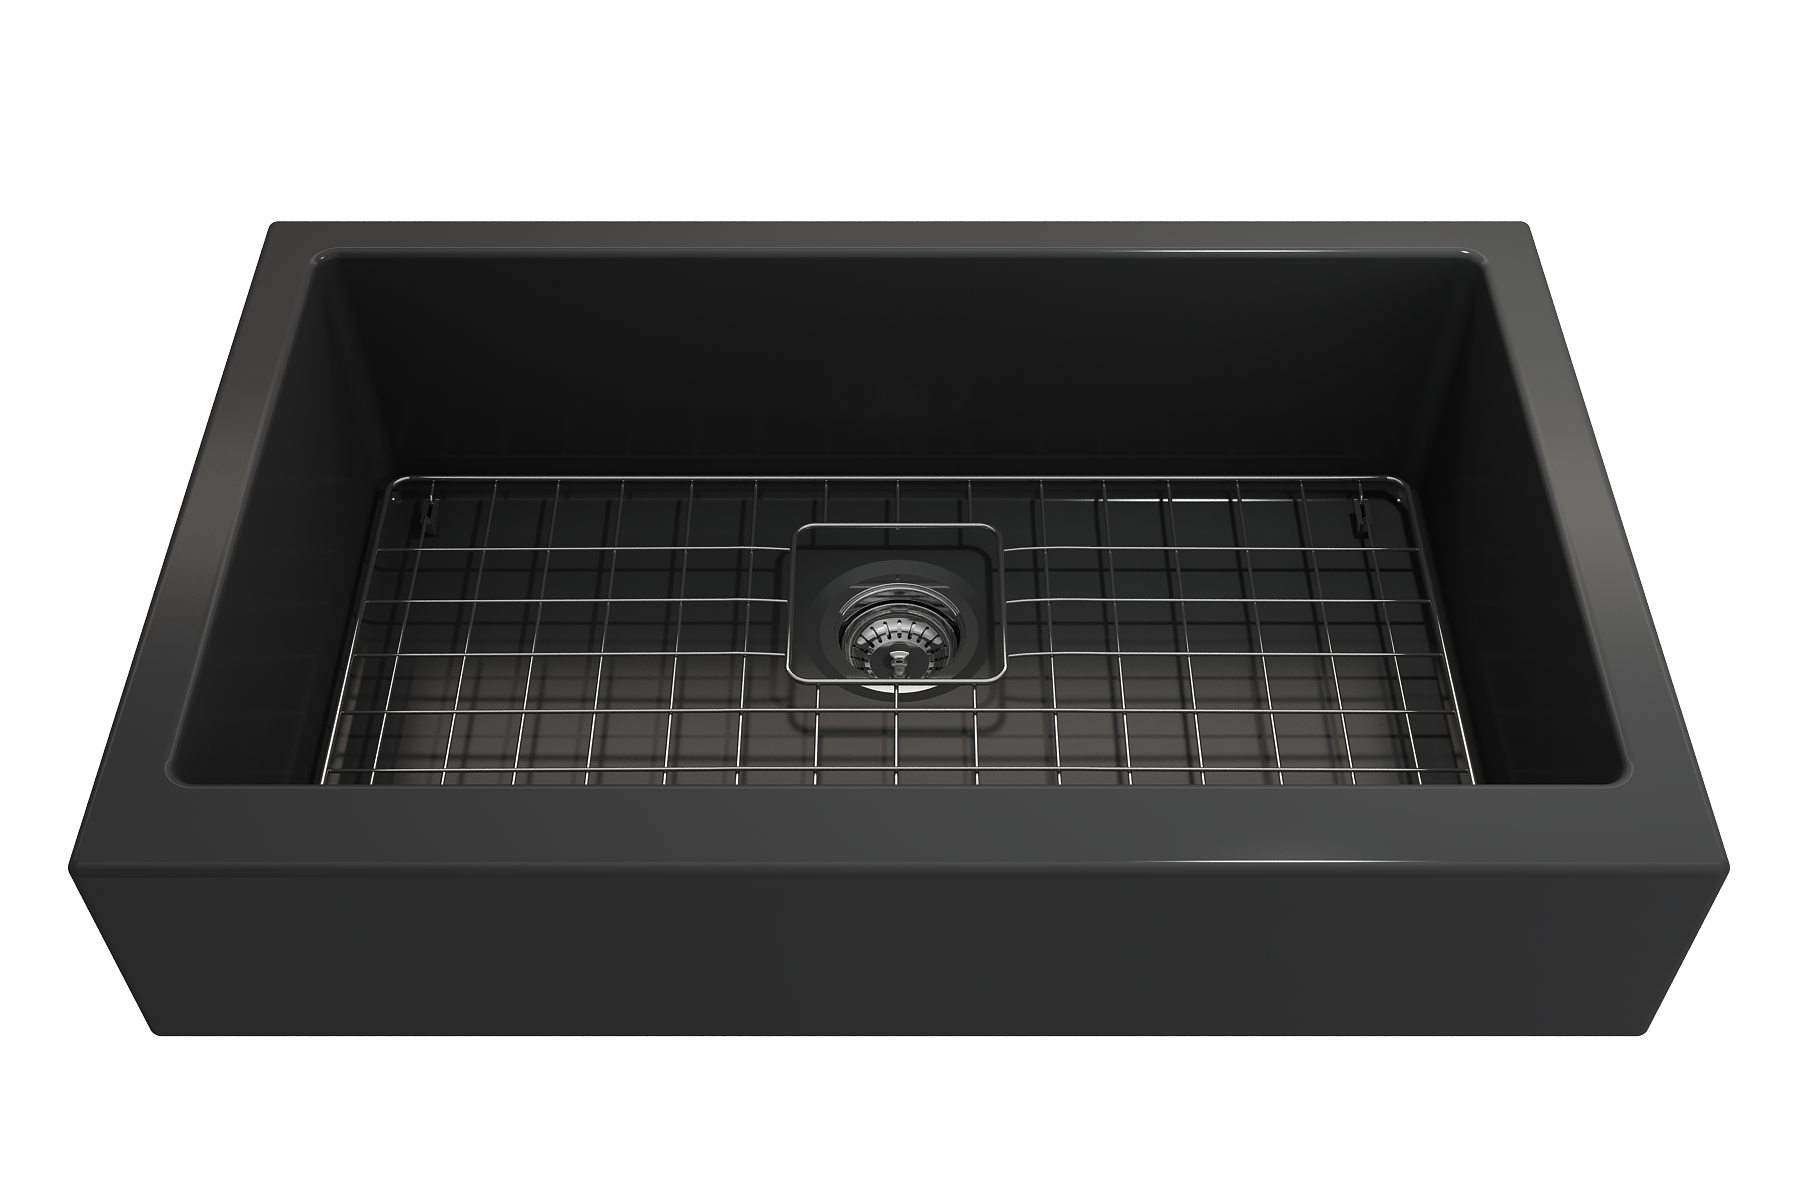 Nuova Pro Short Apron Front Dual-Mount Fireclay 34 in. Single Bowl Kitchen Sink with Protective Bottom Grid and Strainer in Matte Dark Gray